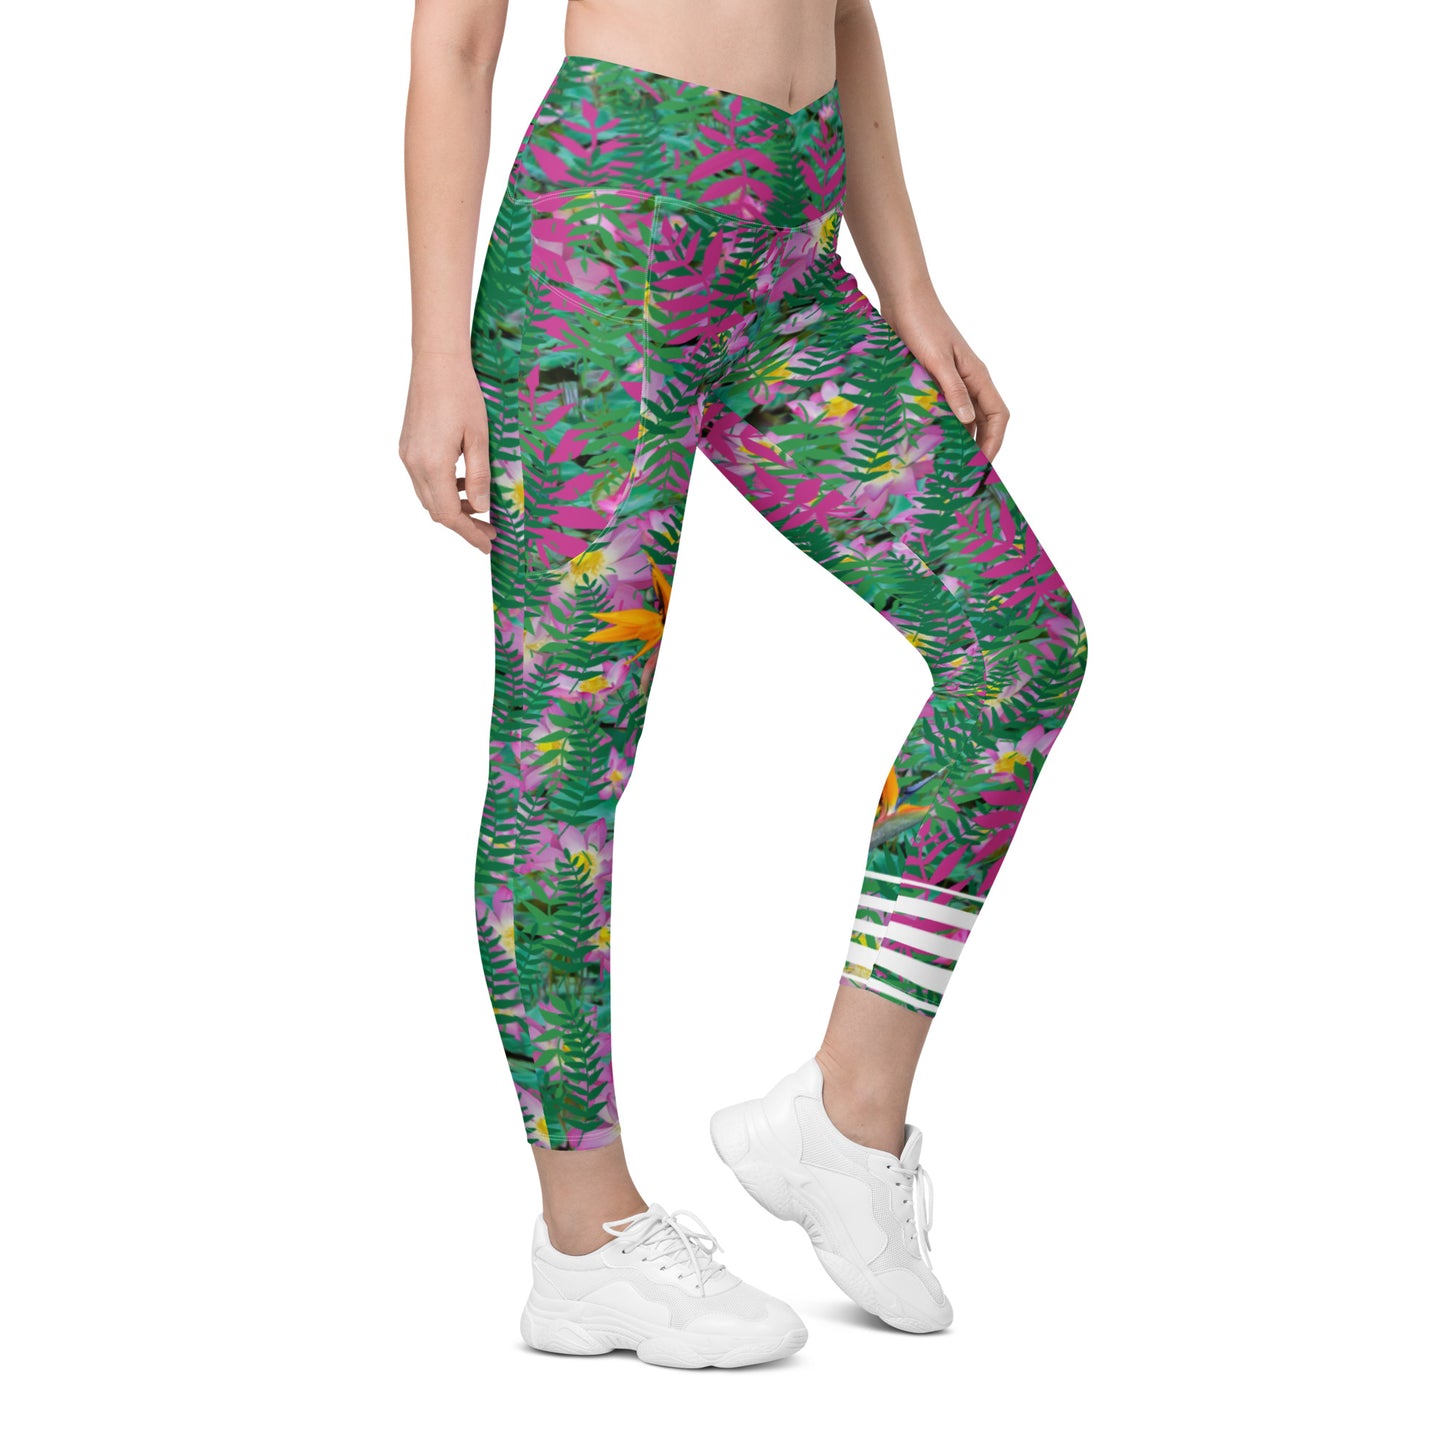 Leggings with pockets - FREE shipping!